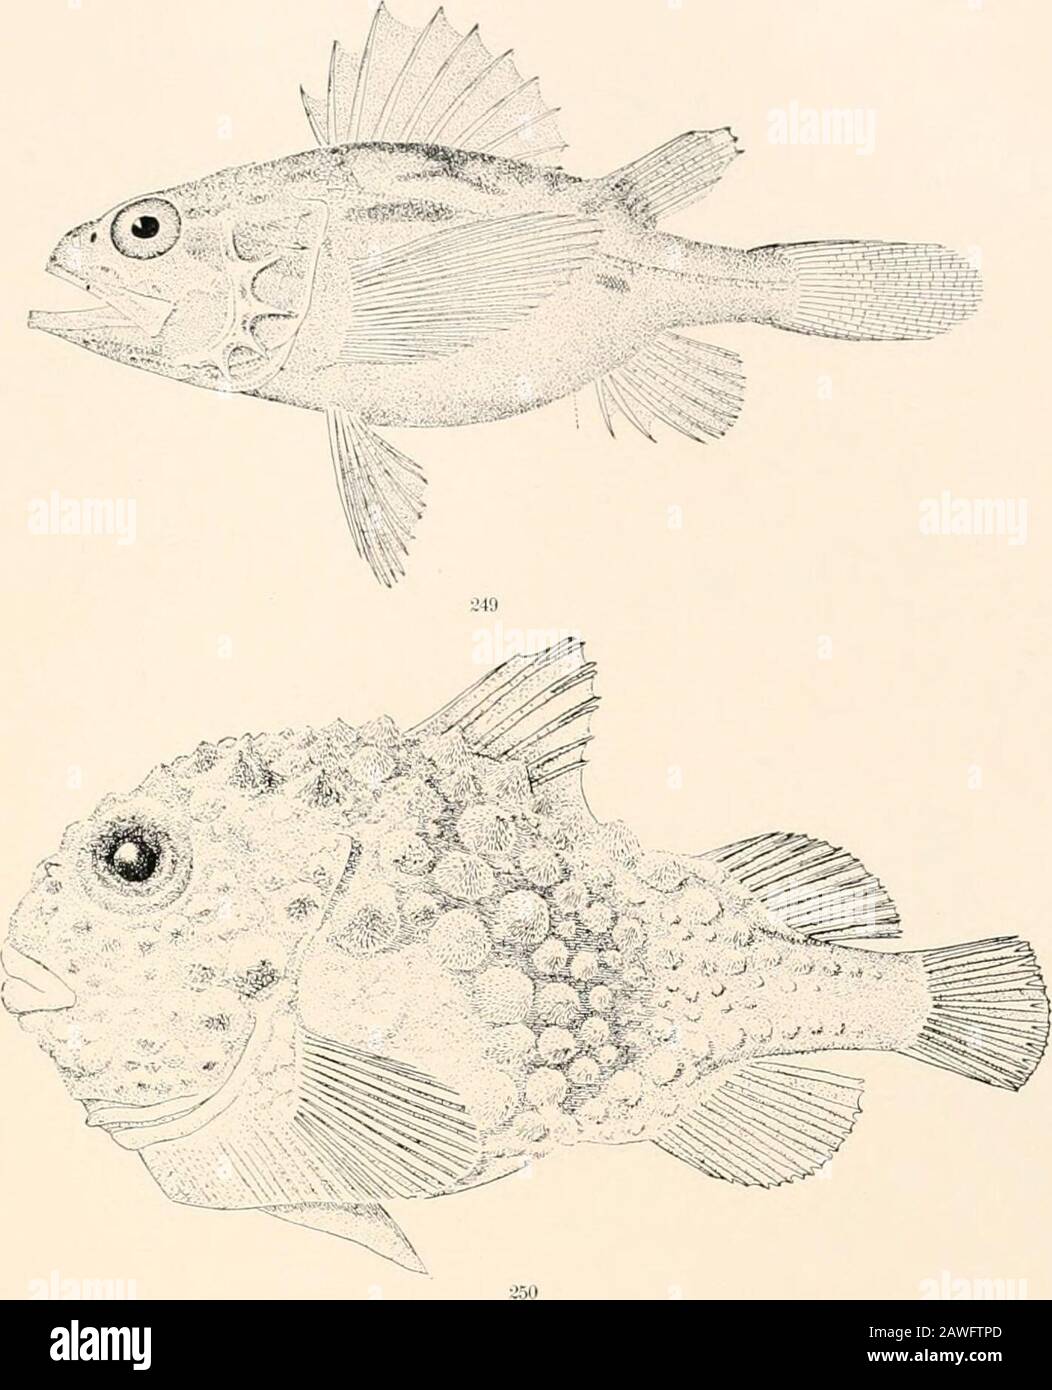 Oceanic ichthyology, a treatise on the deep-sea and pelagic fishes of the world, based chiefly upon the collections made by the steamers Blake, Albatross, and Fish Hawk in the northwestern Atlantic, with an atlas containing 417 figures . .17 PONTINUS MACROLEPIS (p. 257.) 248. Sebastes mahinus. (p. 260.) GOODE AND BEAN—OCEANIC ICHTHYOLOGY. PLATE LXX. Stock Photo